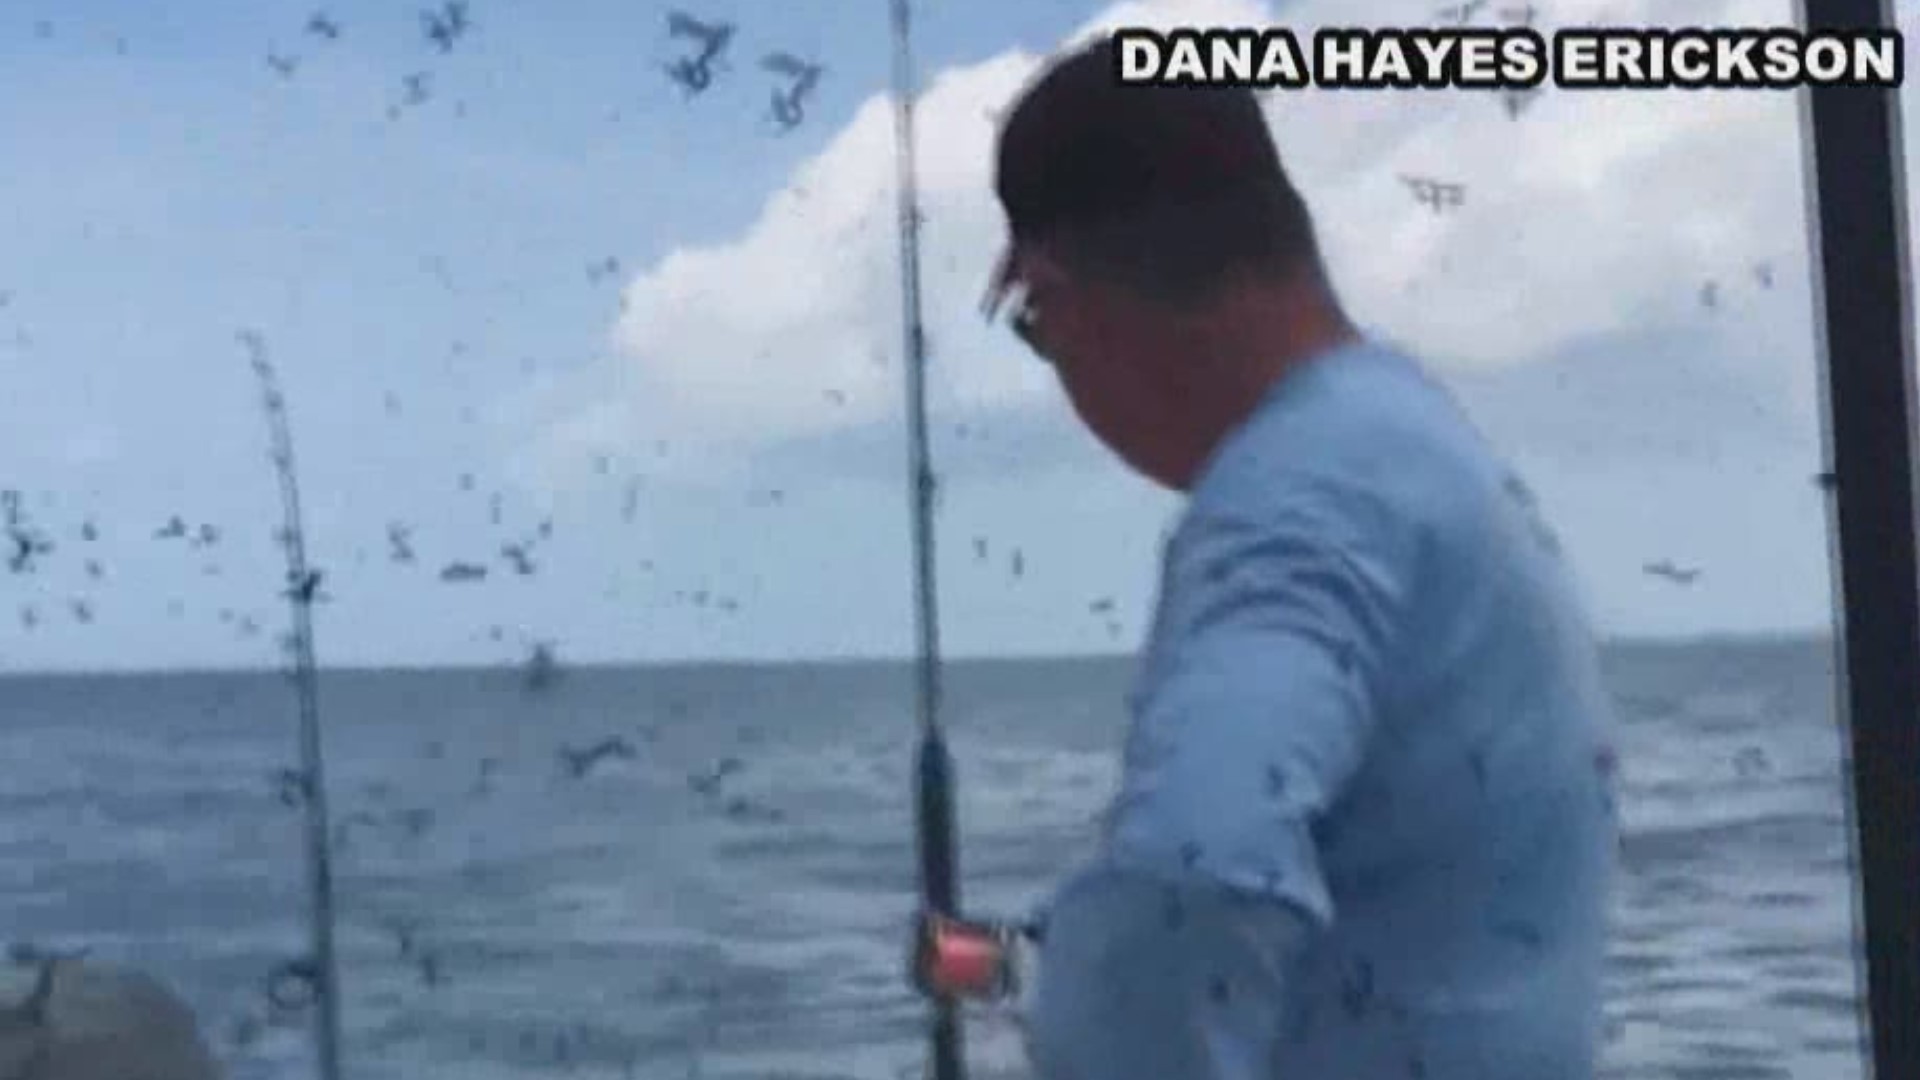 Dana Hayes Erickson got this video of a fishing party ruined by a swarm of love bugs.